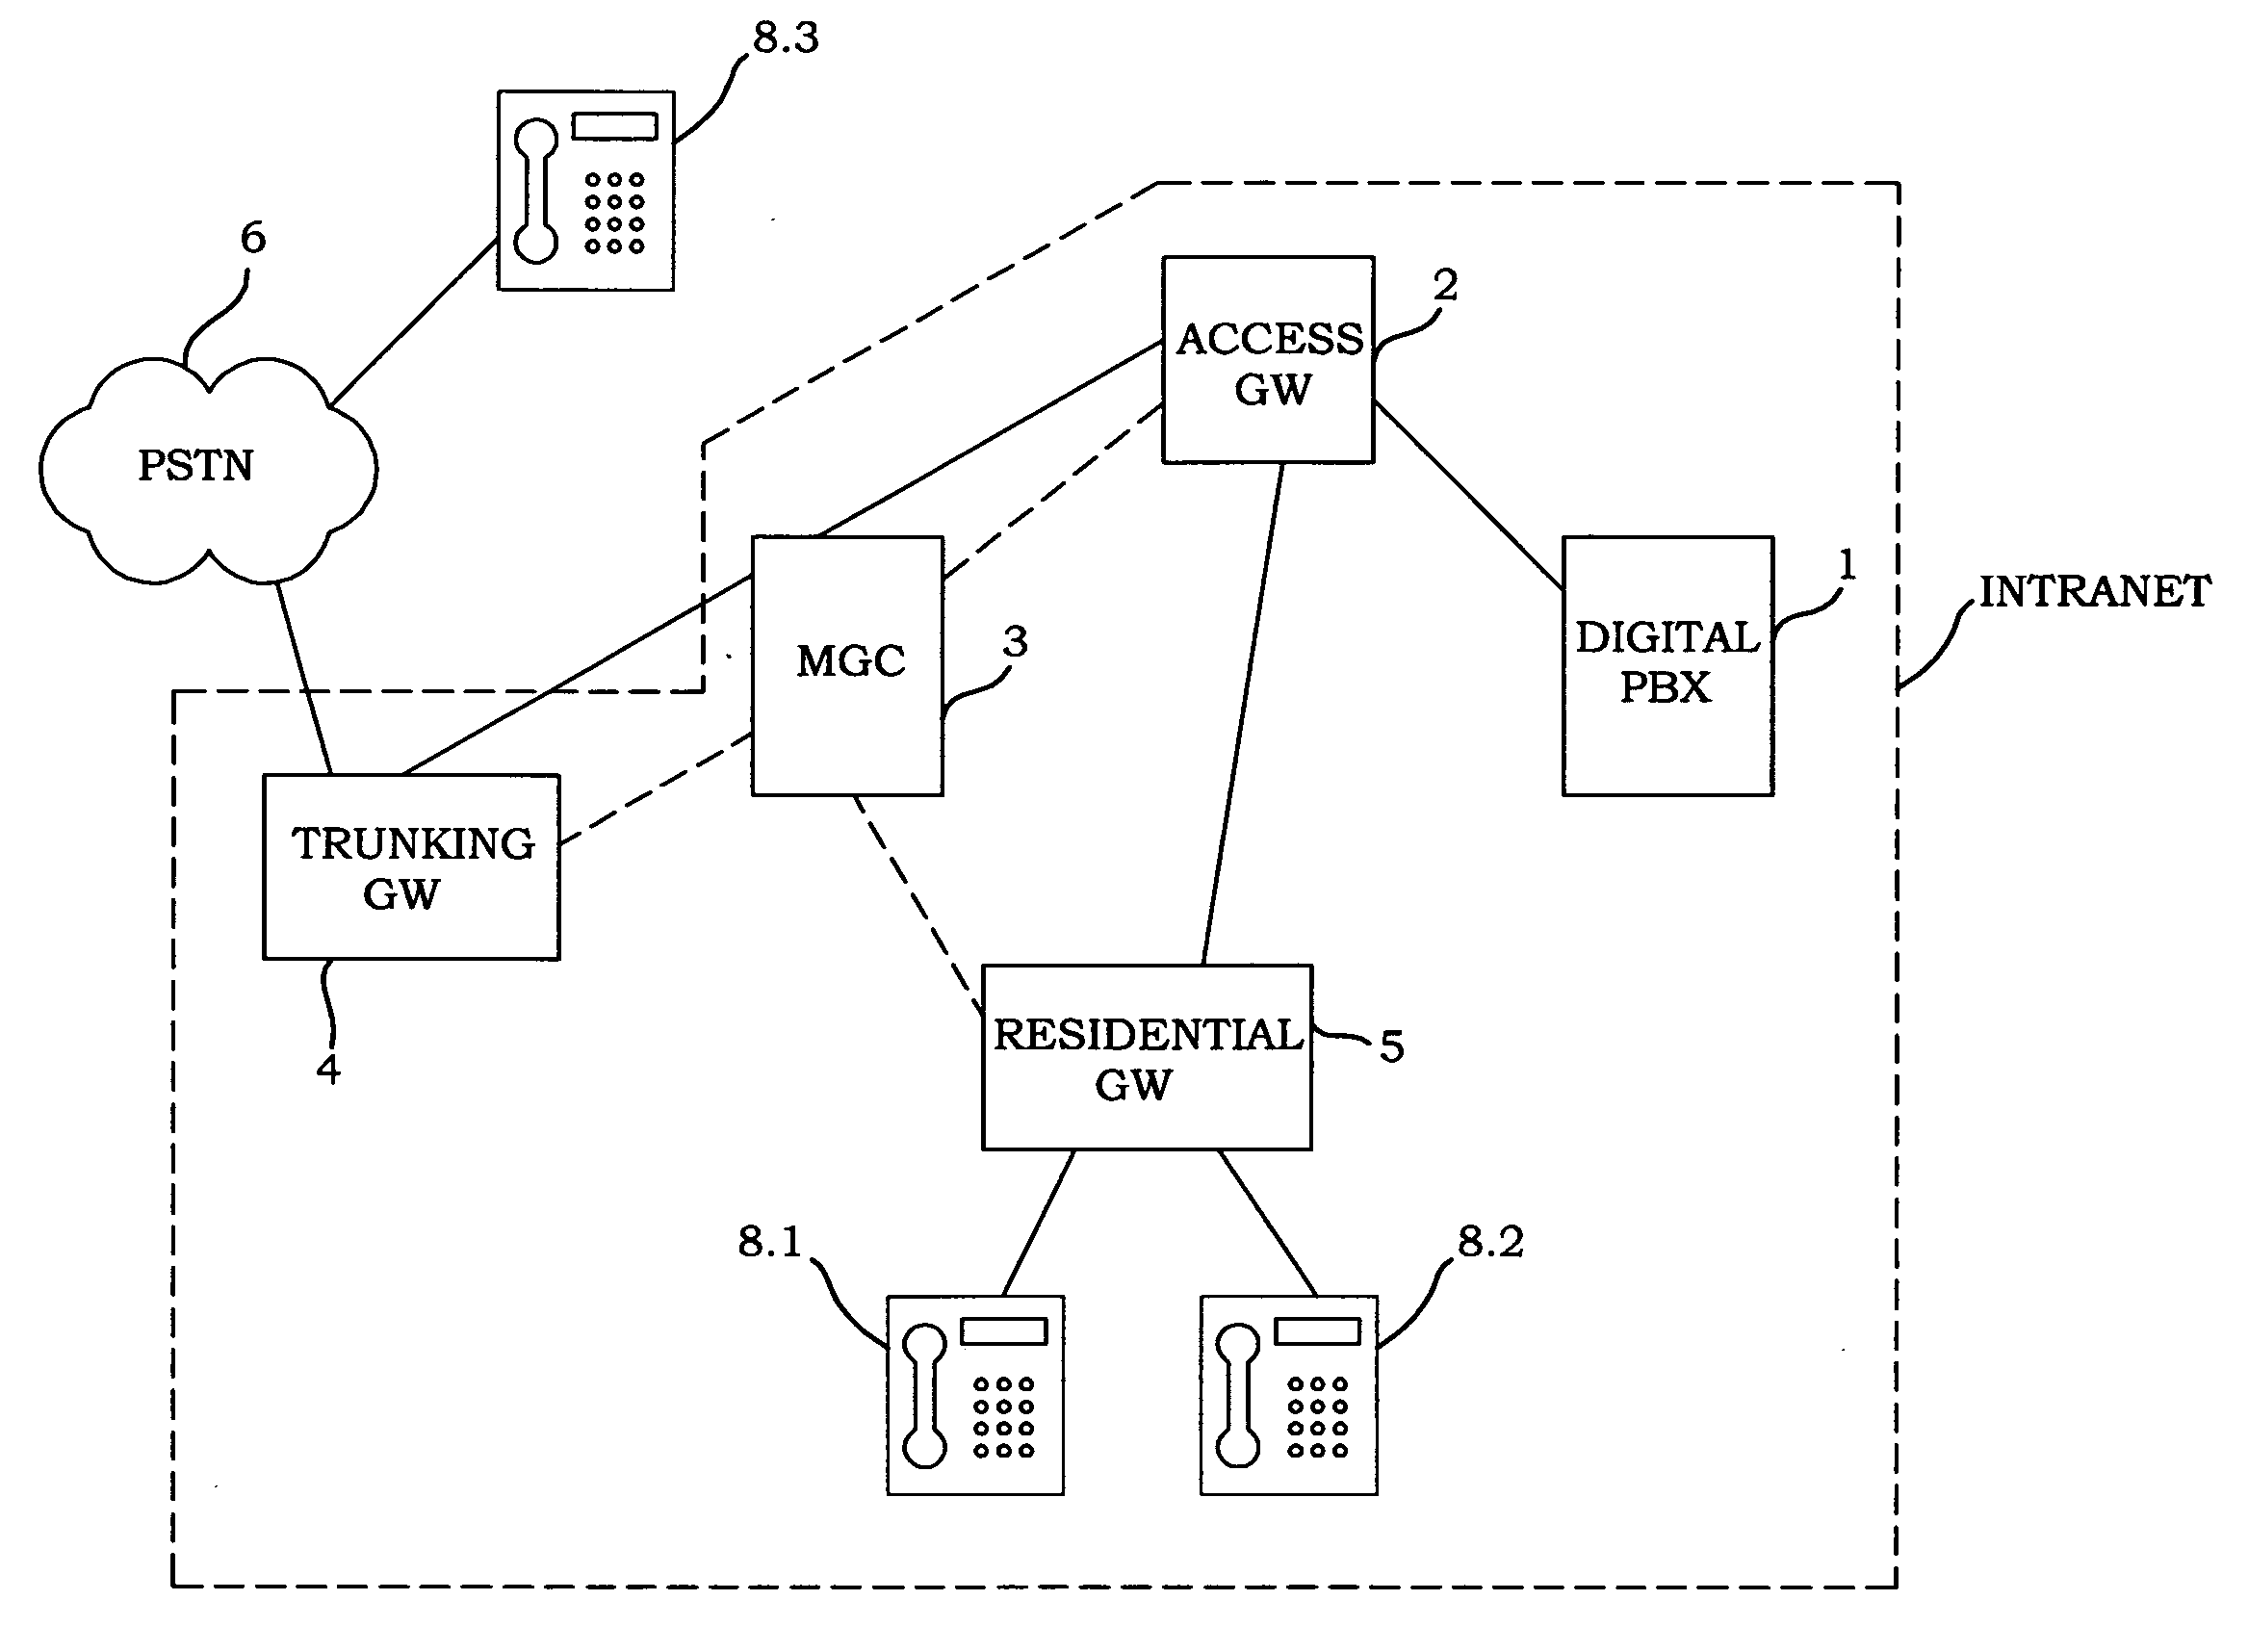 Sniffing-based network monitoring